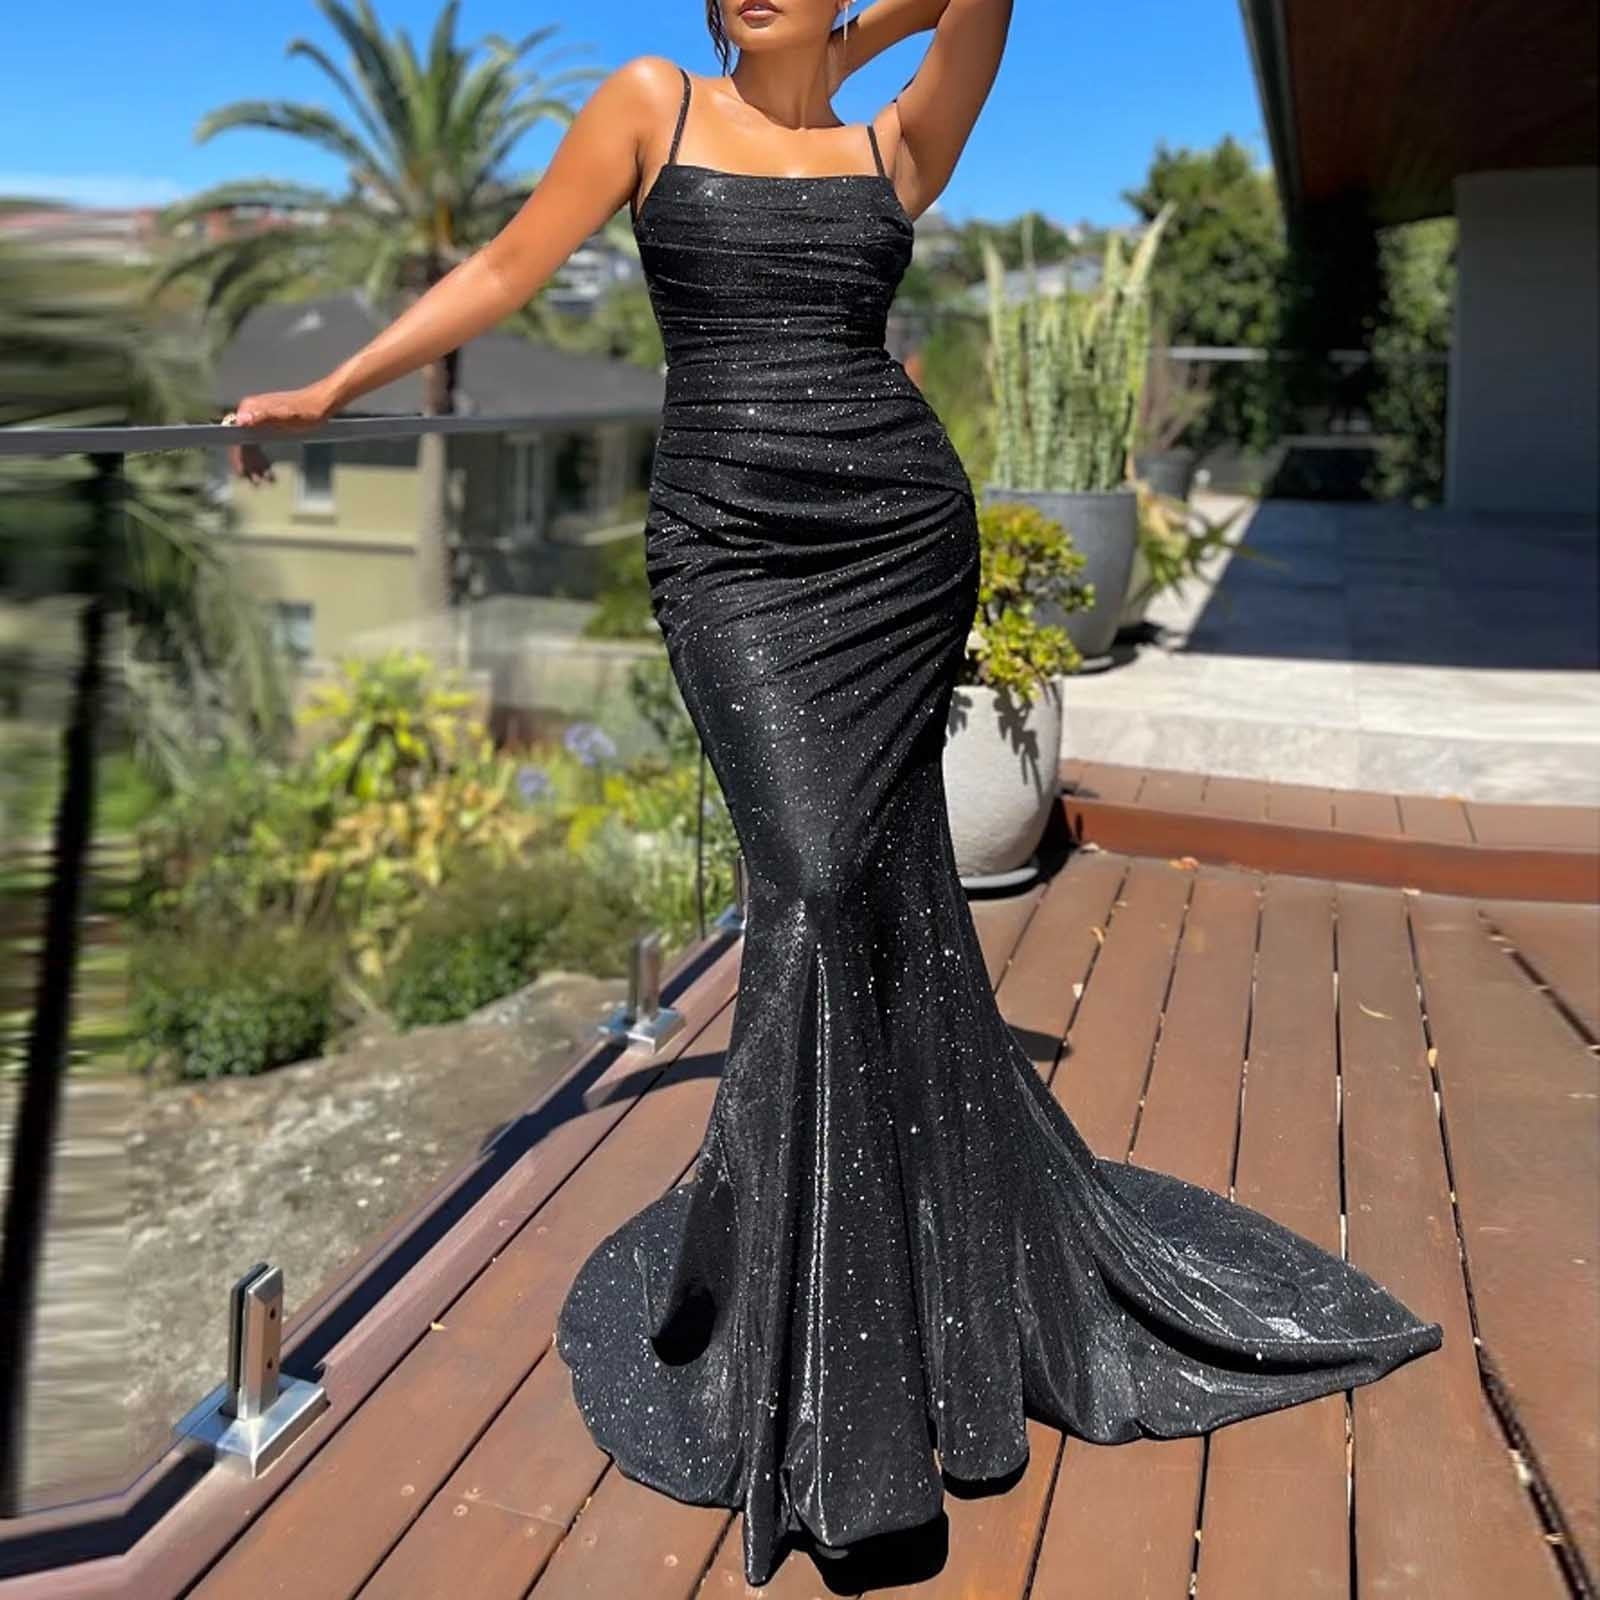 Buy Sleeveless Double V-Neck Long Mermaid Sequin Formal Evening Dresses,  Black, XX-Large at Amazon.in